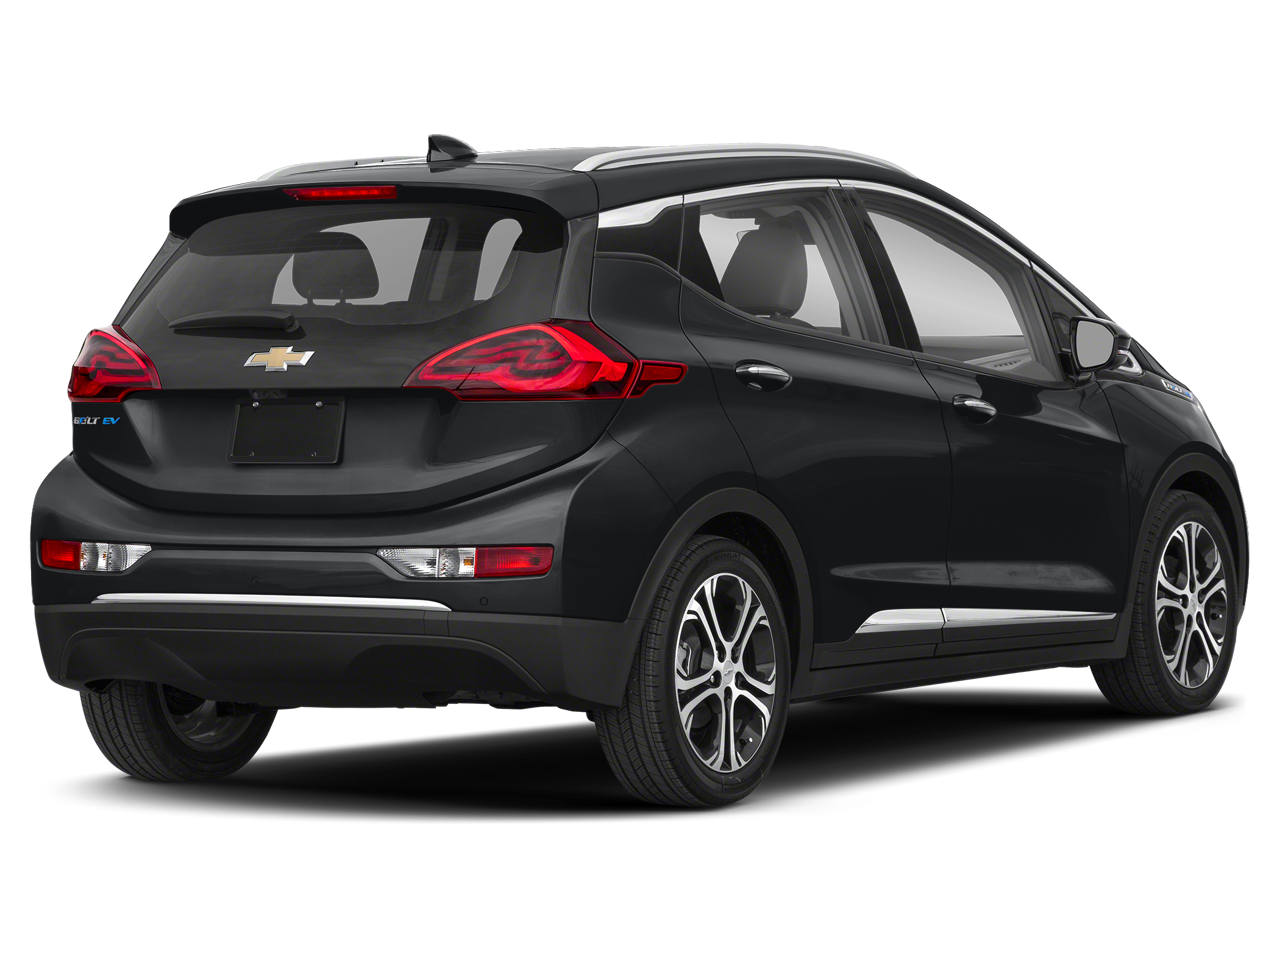 Used 2021 Chevrolet Bolt EV Premier with VIN 1G1FZ6S00M4111090 for sale in Upland, CA